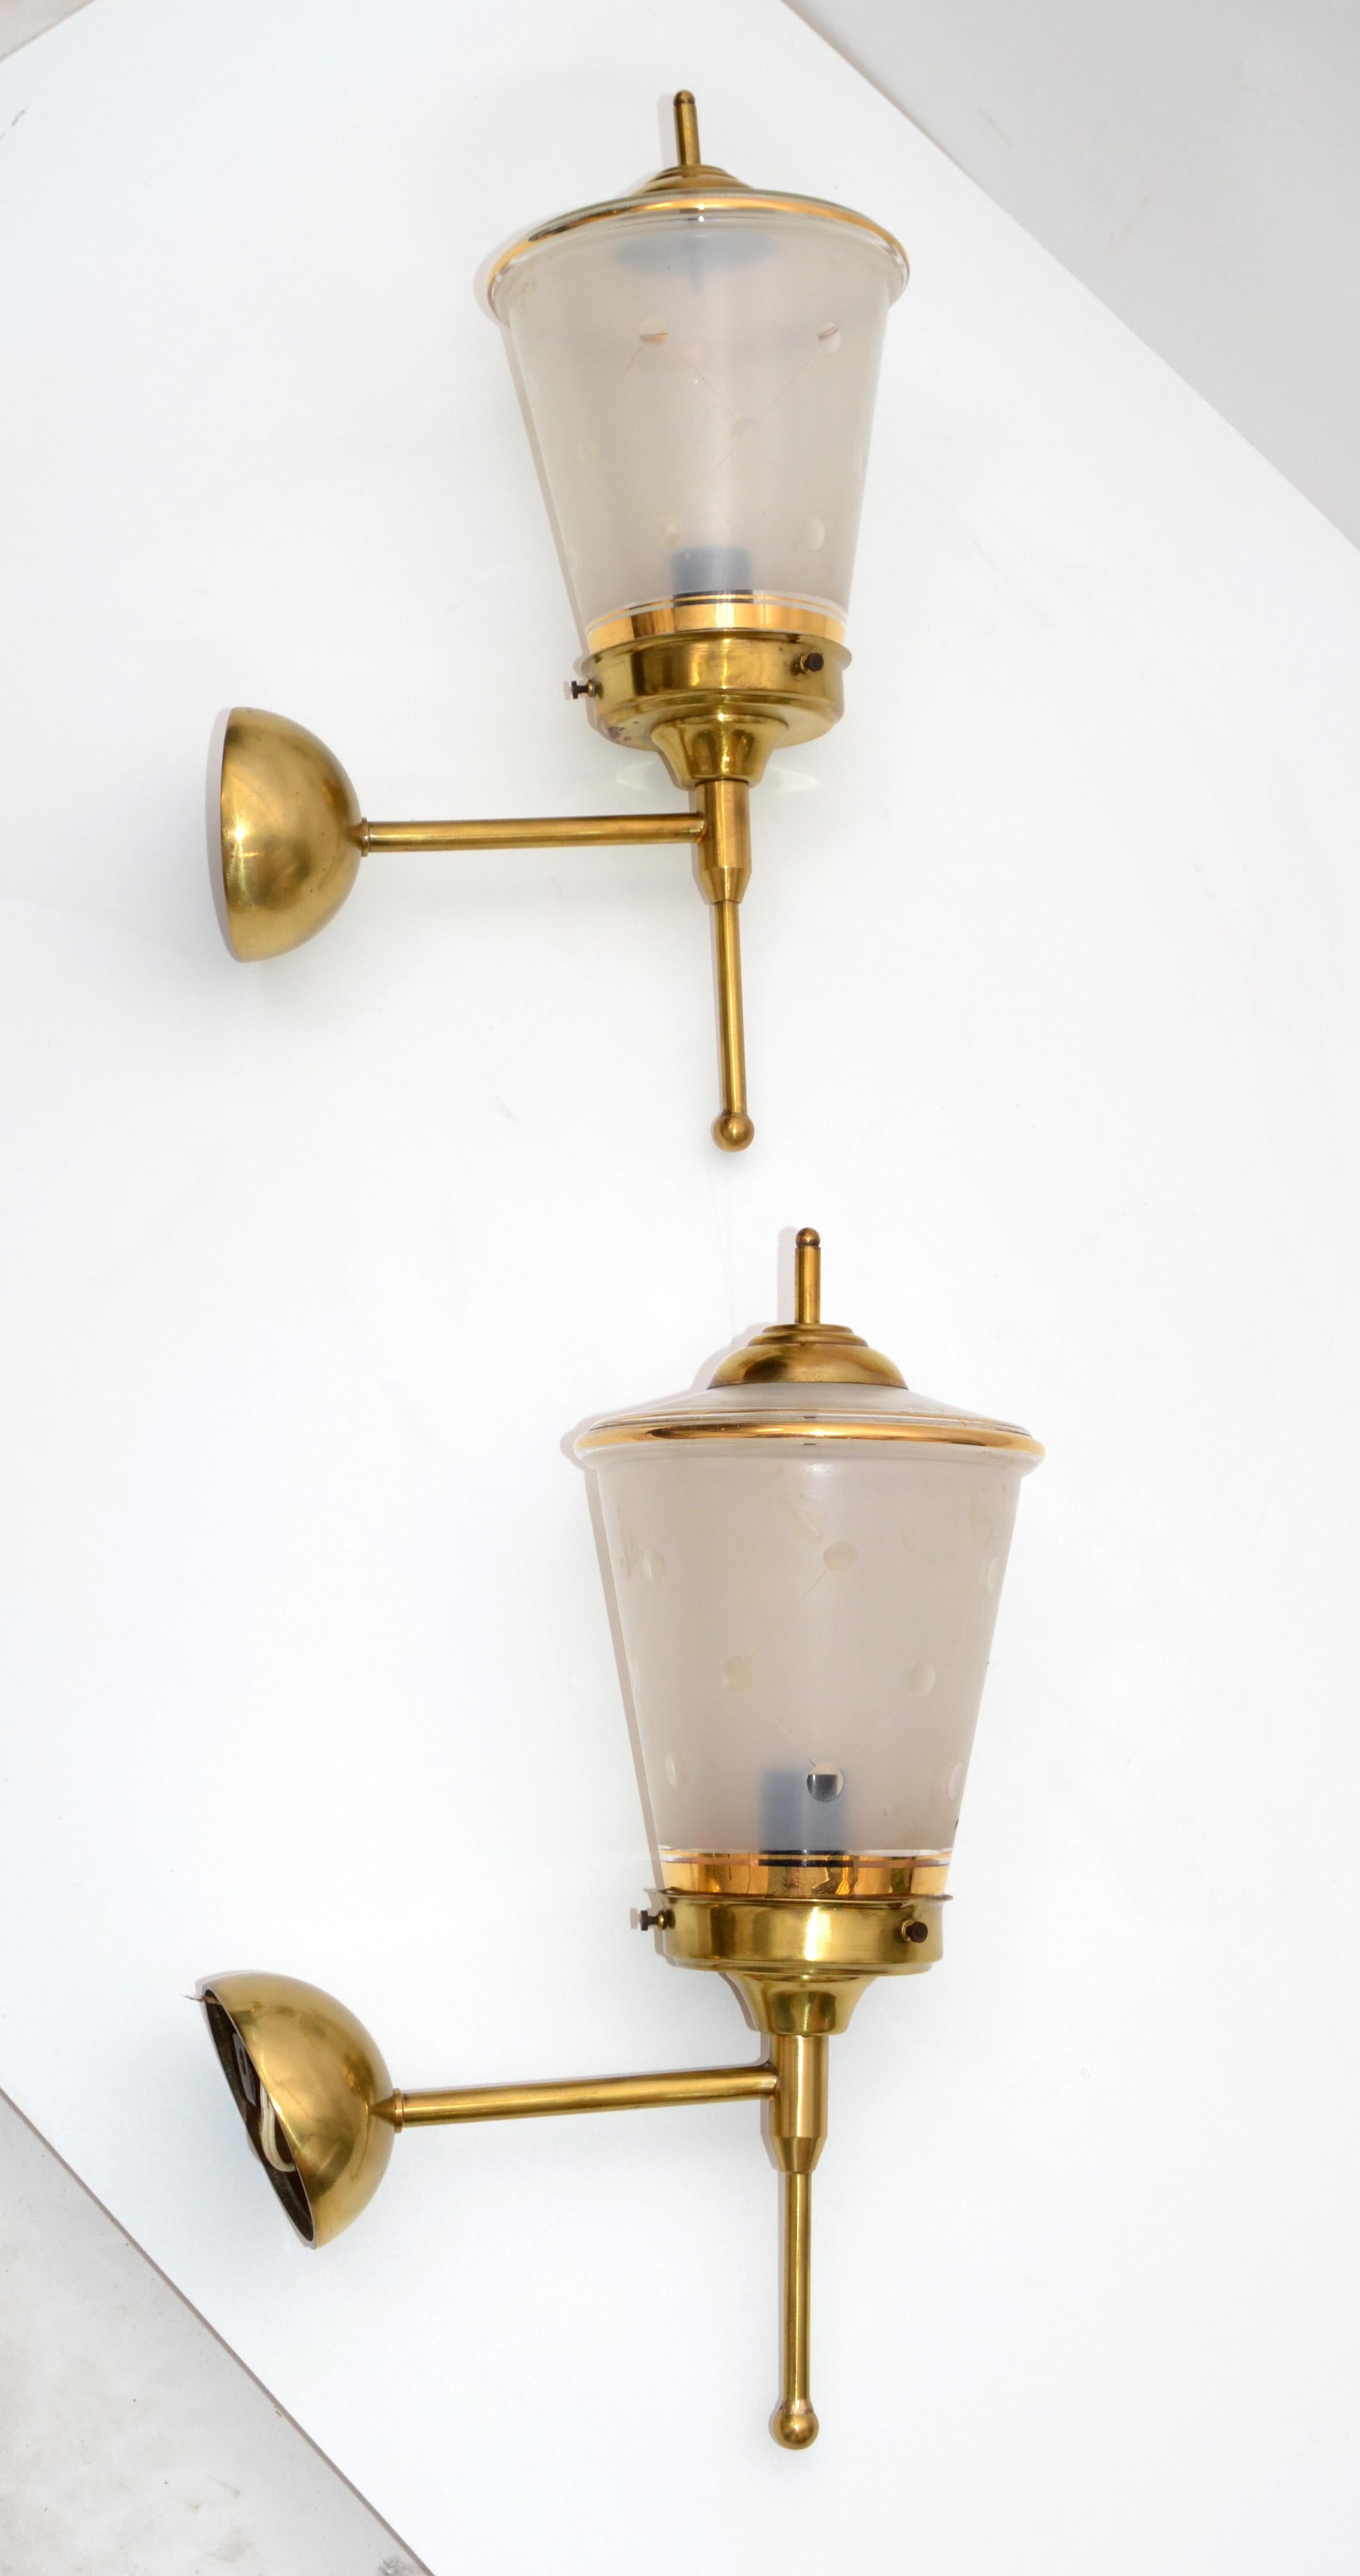 20th Century Maison Lunel Pair of Ornate Glass and Brass Lantern Wall Mounted Sconces, France For Sale